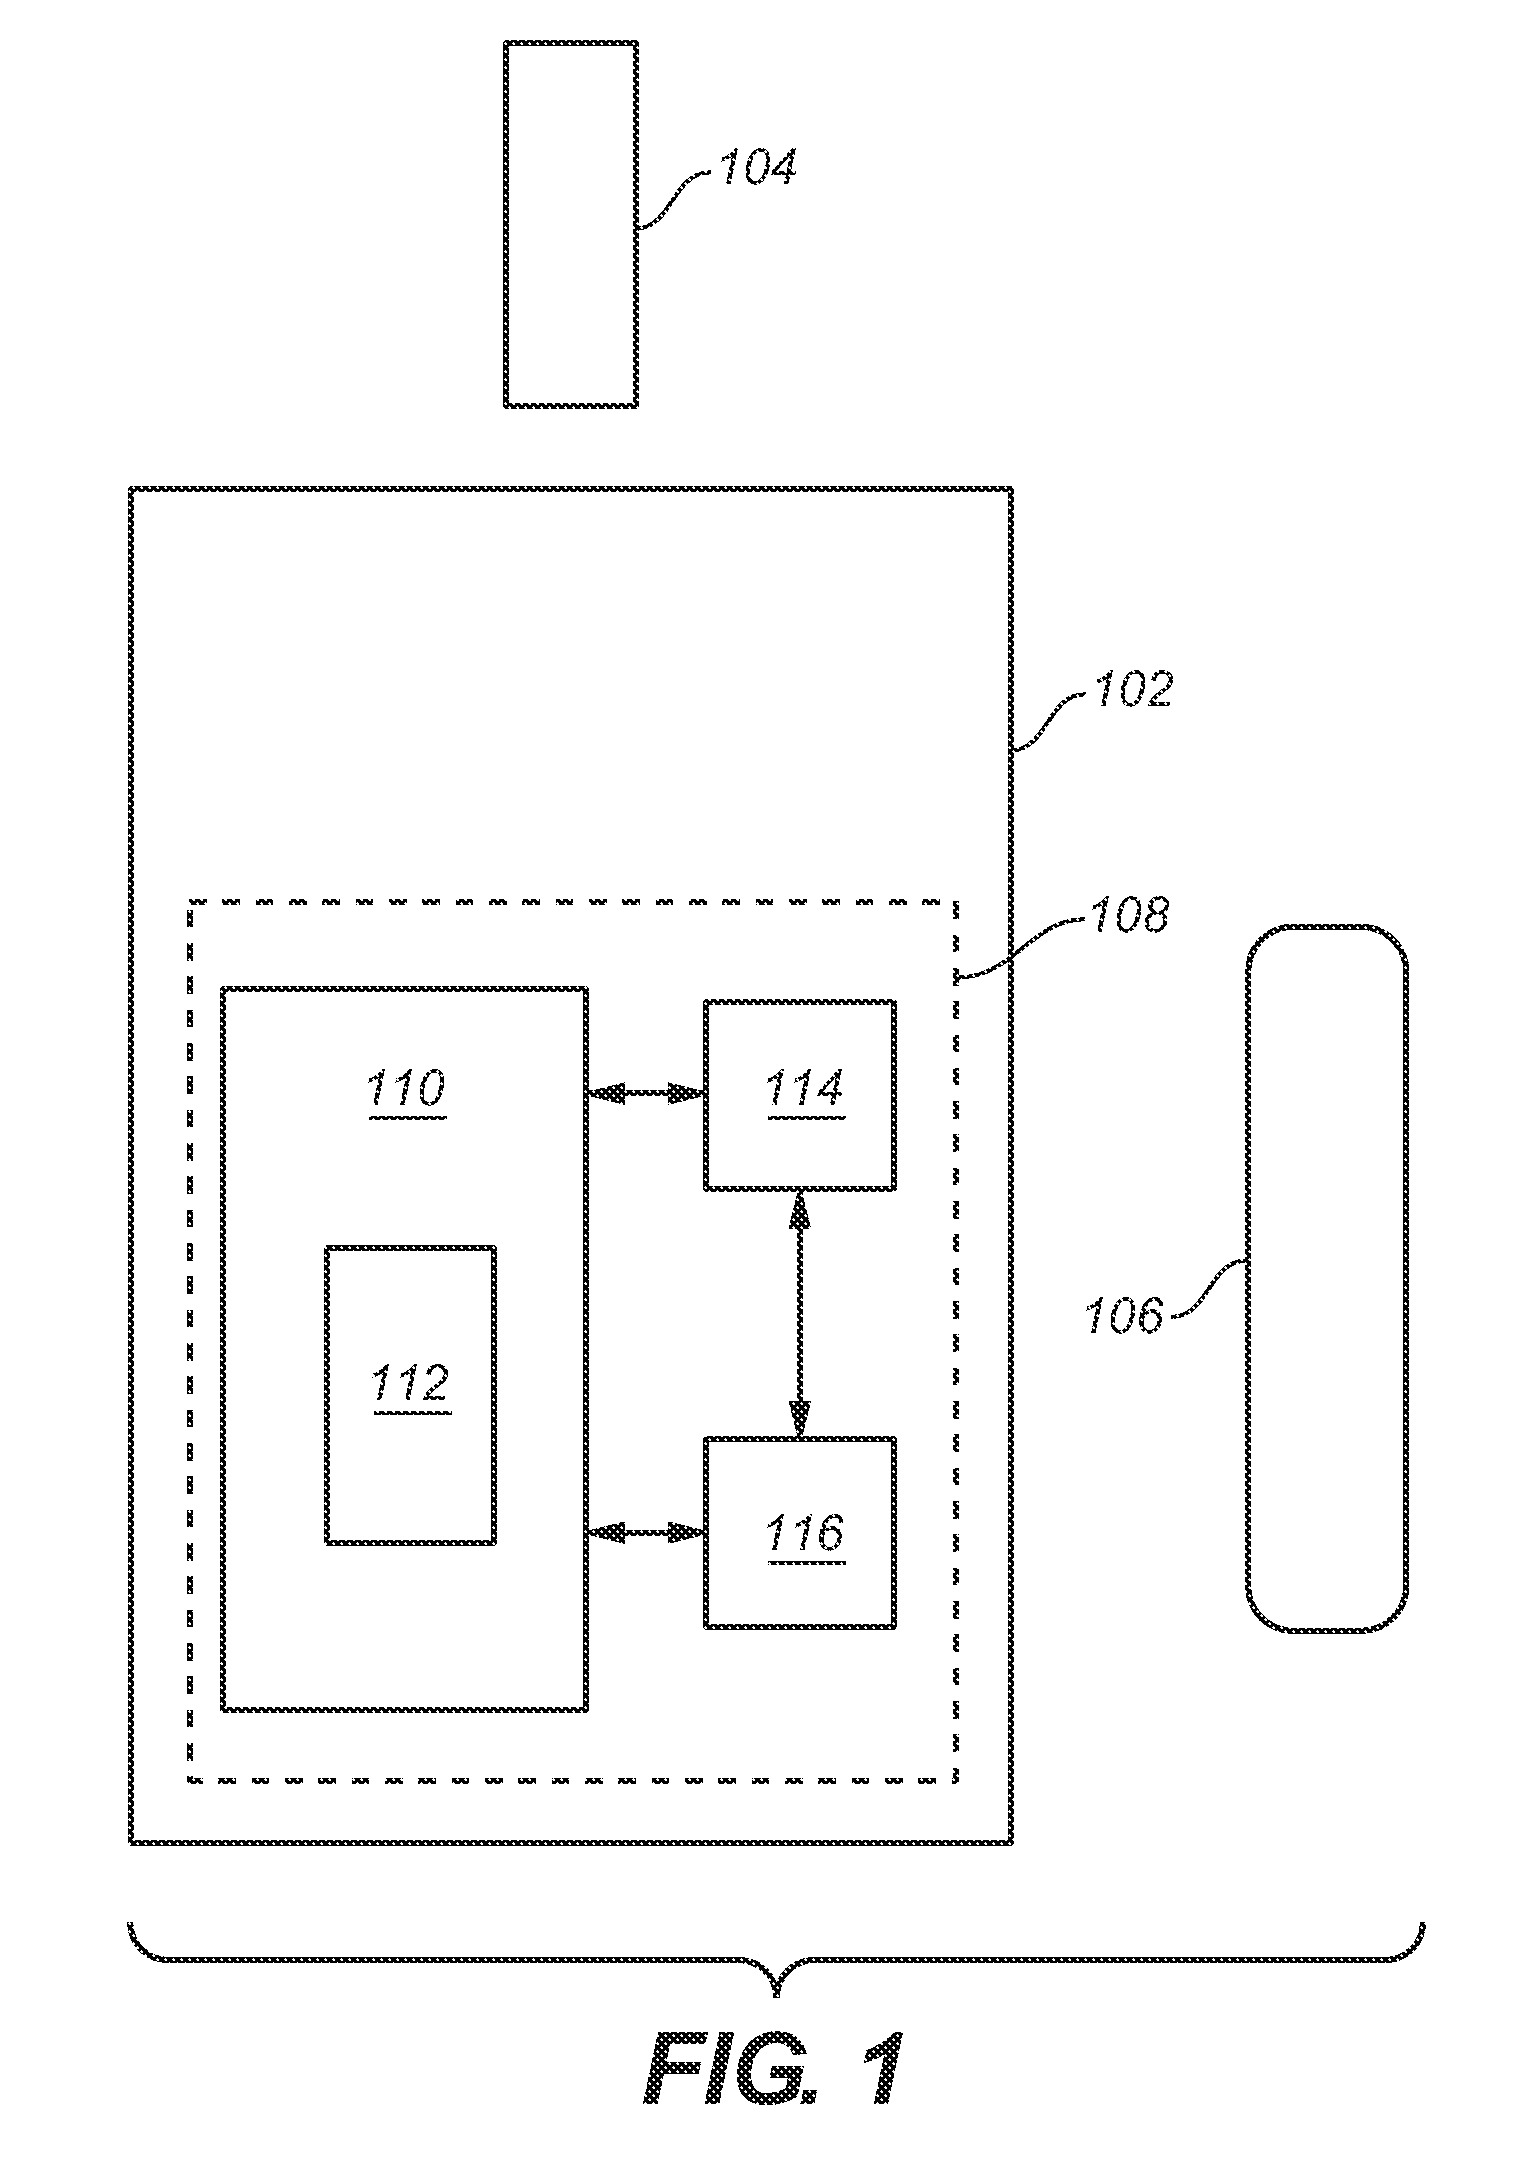 Event-driven method for tutoring a user in the determination of an analyte in a bodily fluid sample